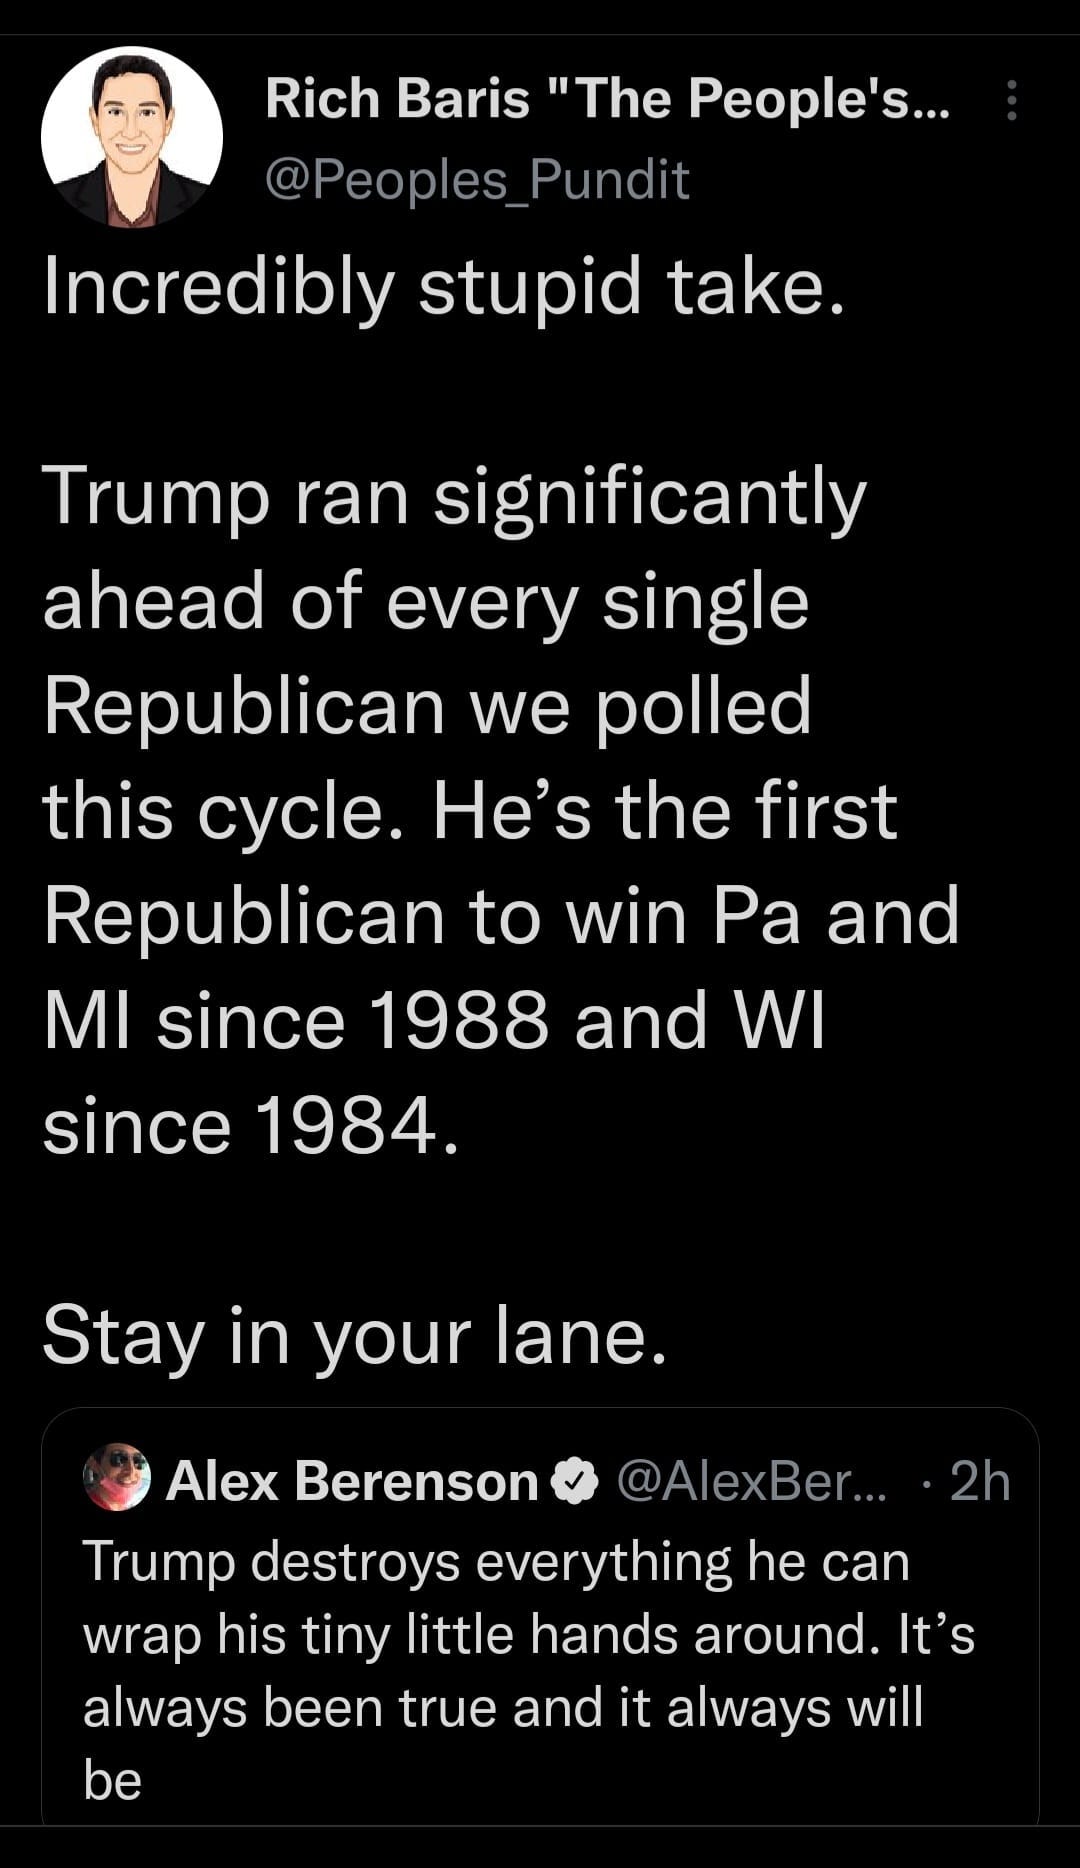 May be an image of 1 person and text that says 'Rich Baris "The People's... @Peoples Pundit Incredibly stupid take. Trump ran significantly ahead of every single Republican we polled this cycle. He's the first Republican to win Pa and MI since 1988 and WI since 1984 Stay in your ane Alex Berenson @AlexBer... ・2h Trump destroys everything he can wrap his tiny little hands around. It's always been true and it always will be'